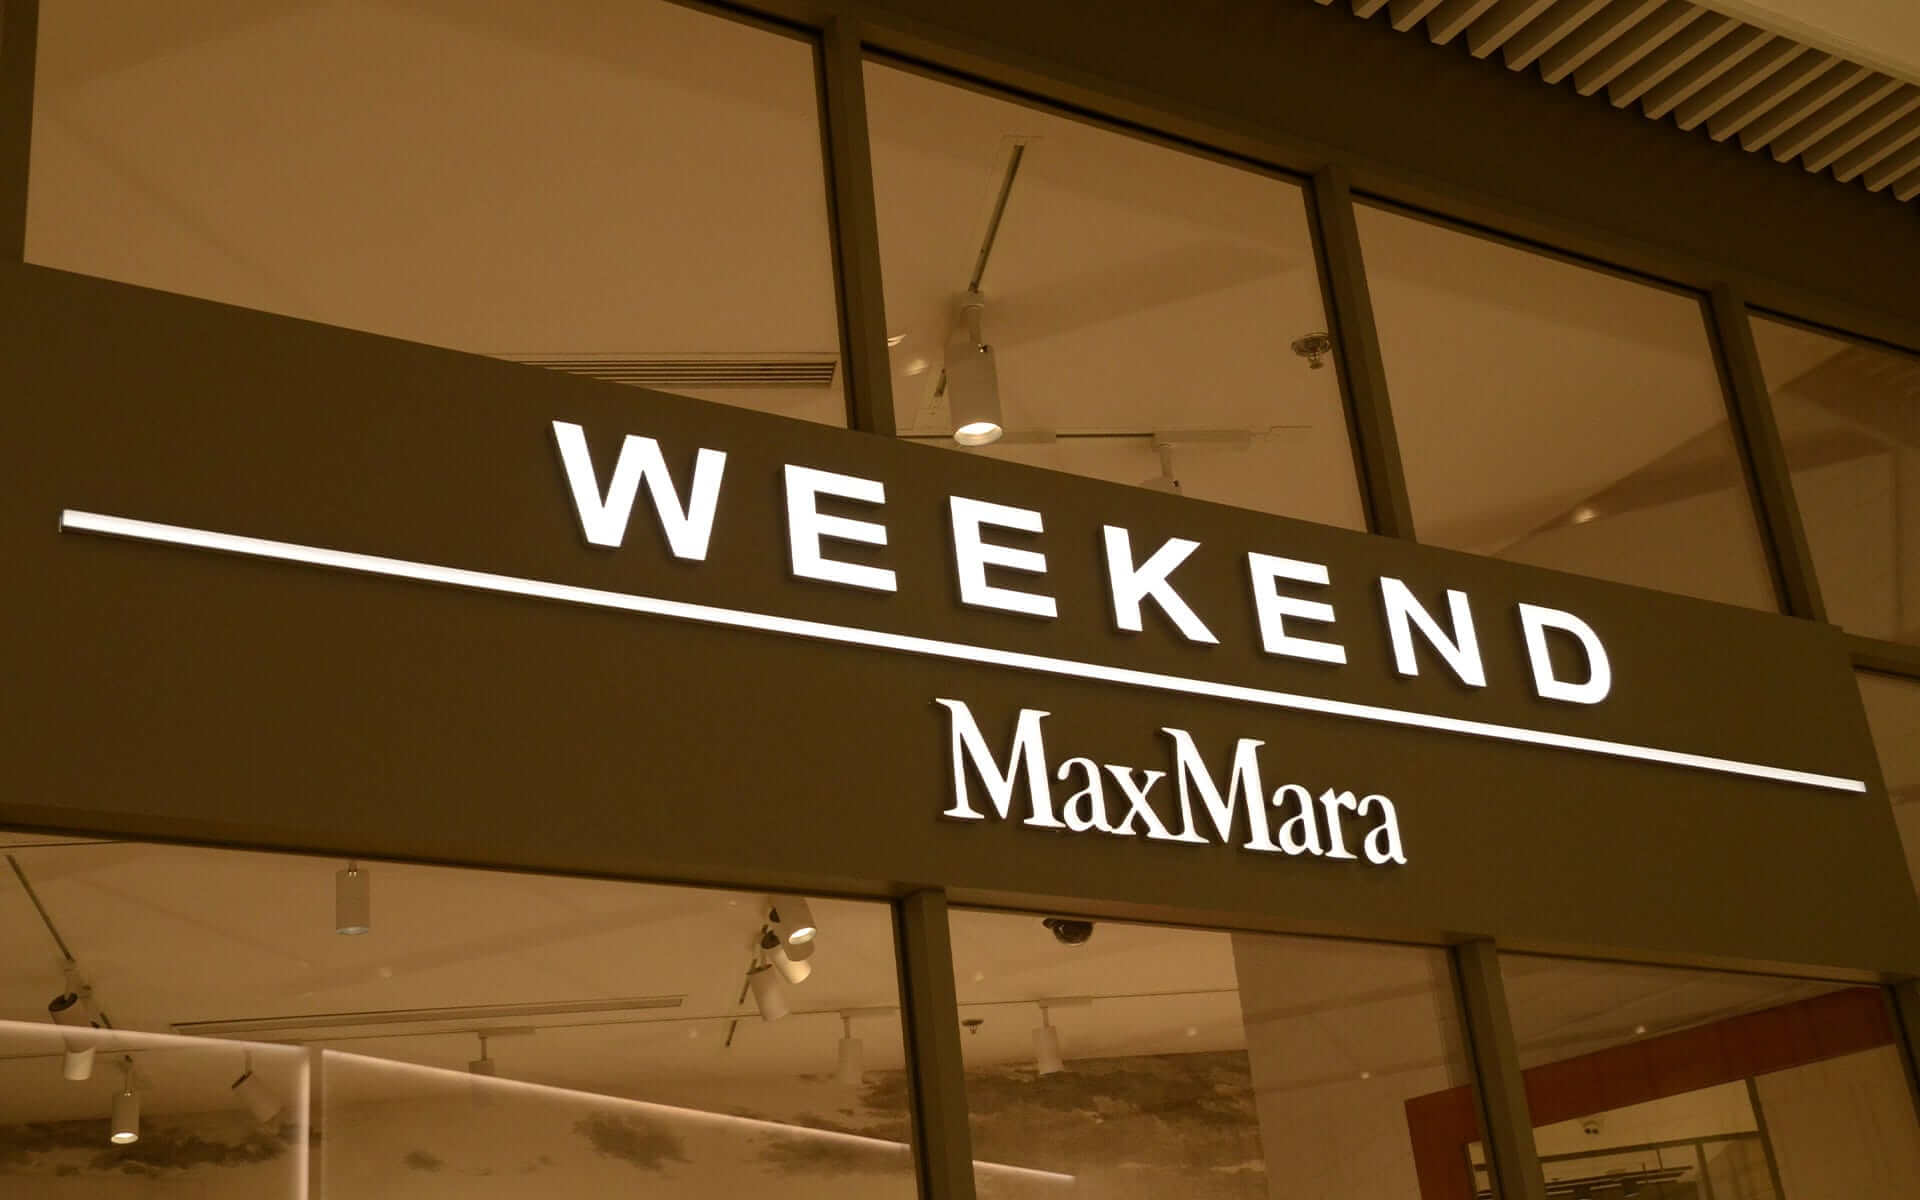 Face-lit Acrylic Channel Letters for Weekend Maxmara